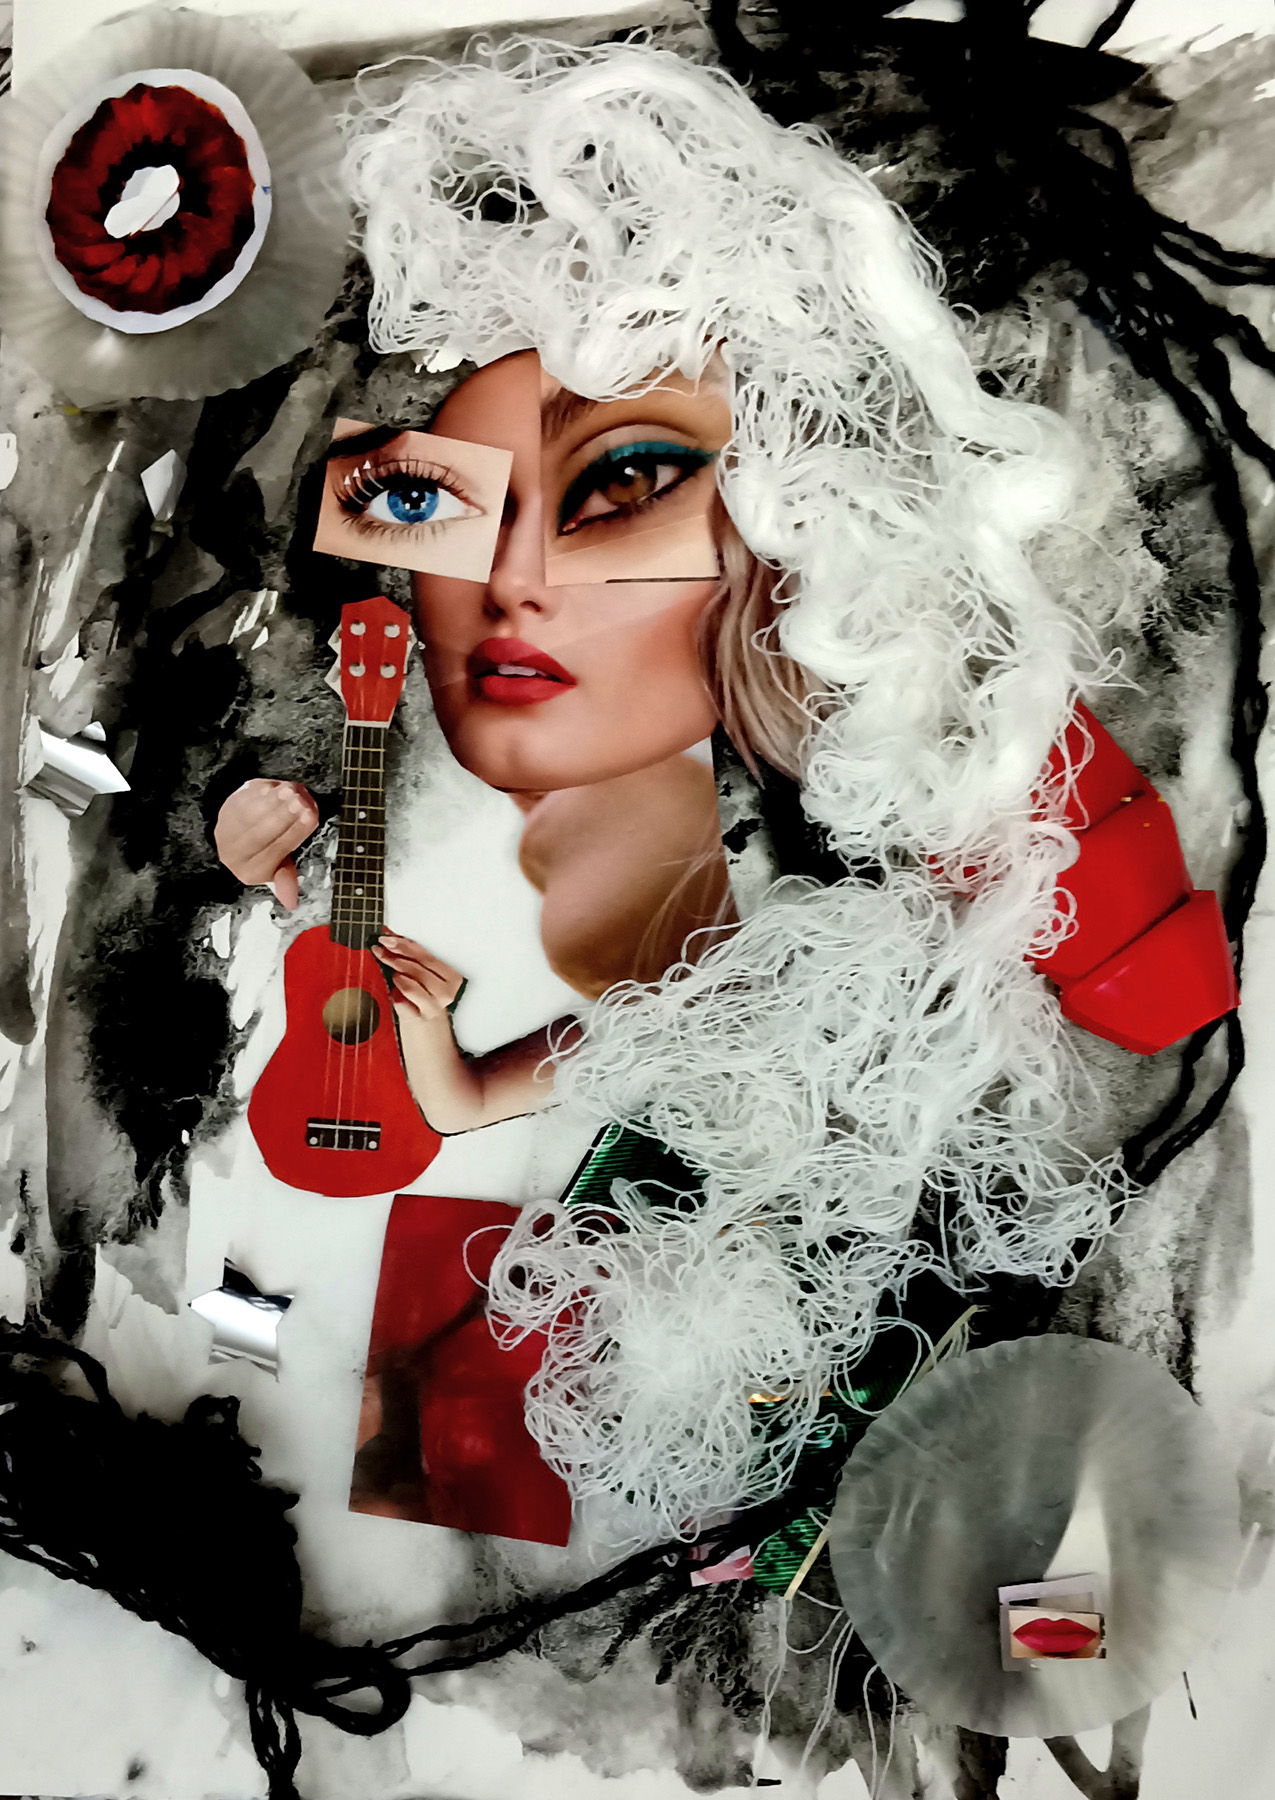 black, white, and red collage featuring a glamorous female face with red lipstick, oversized eyes, and white string in the shape of a hairdo; hands holding a red ukulele, and other elements like black yarn and pastry wrappers on top of a gray and white watercolor background